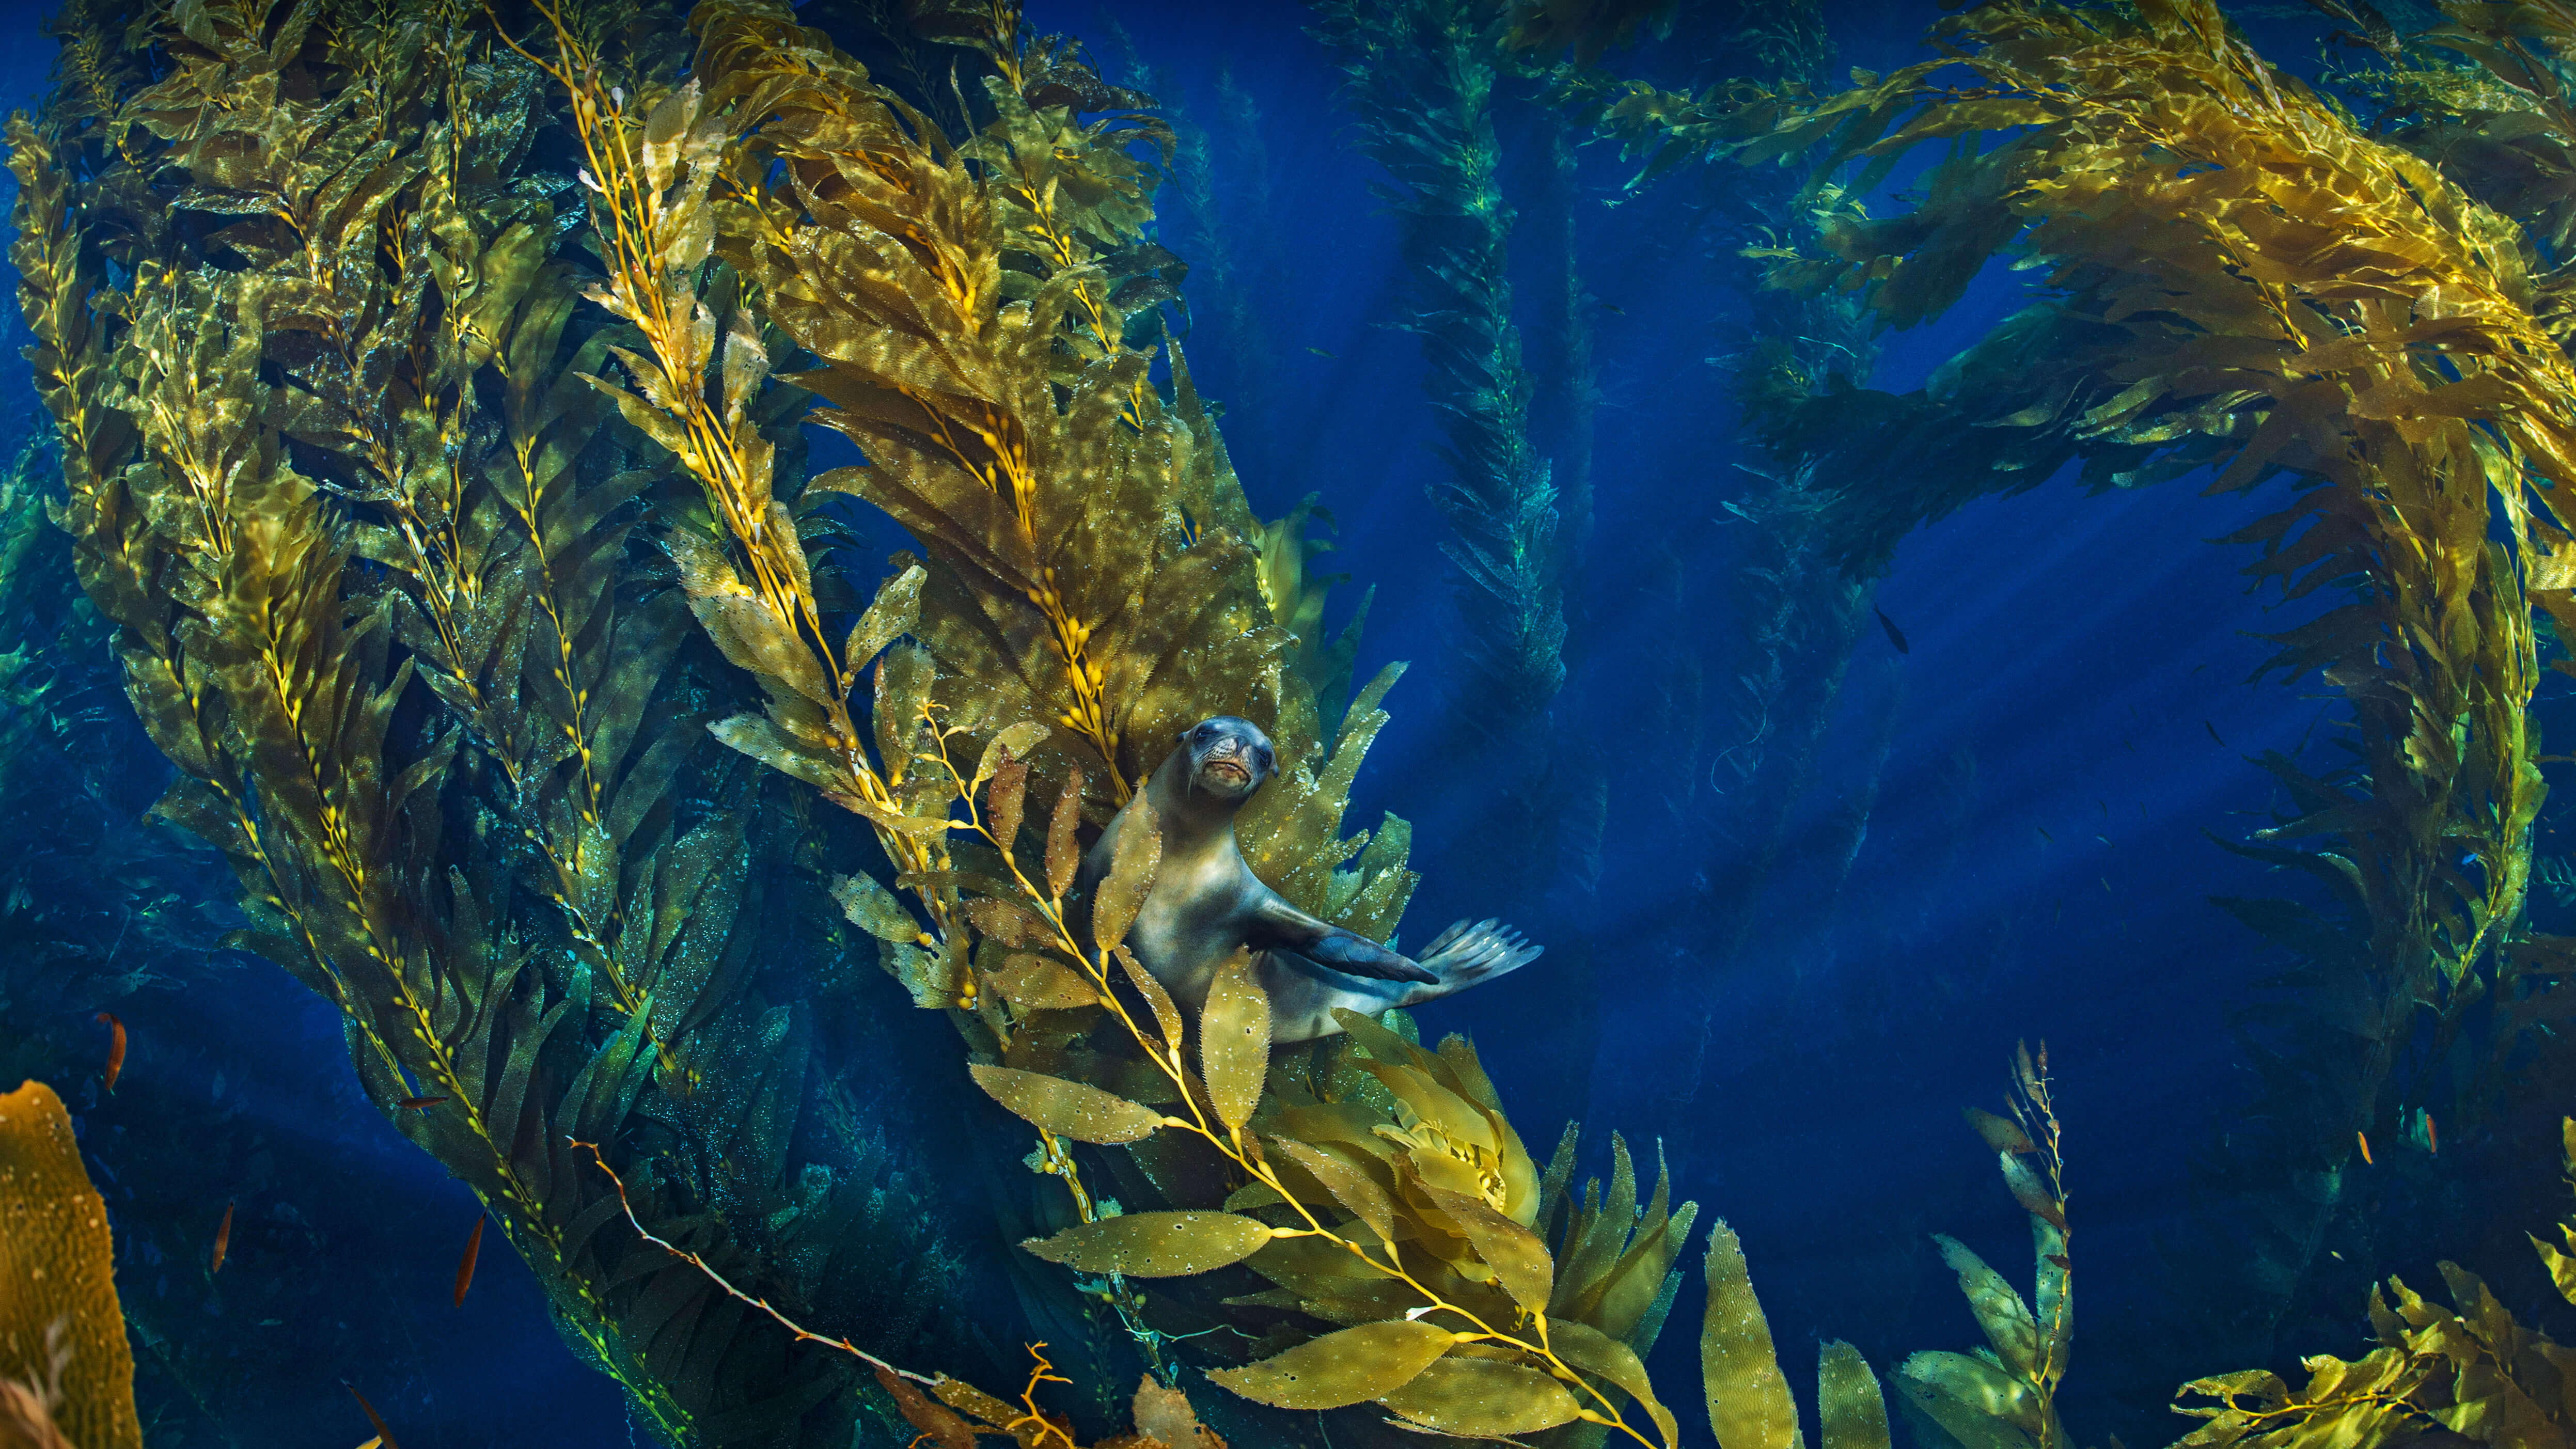 Who's hiding in the kelp?